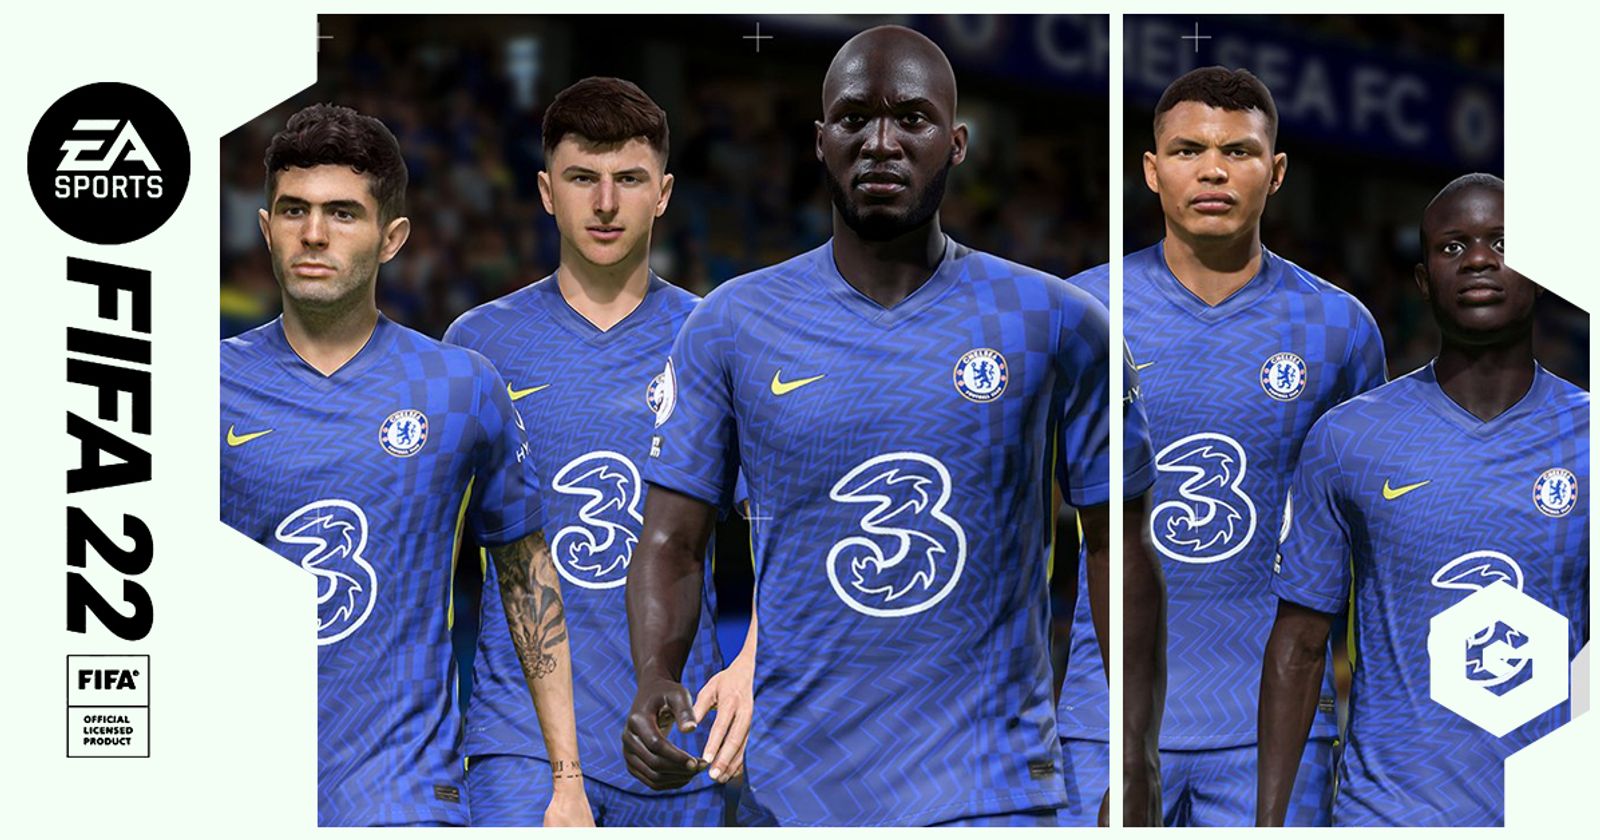 EA Sports has released its annual player ratings for the upcoming